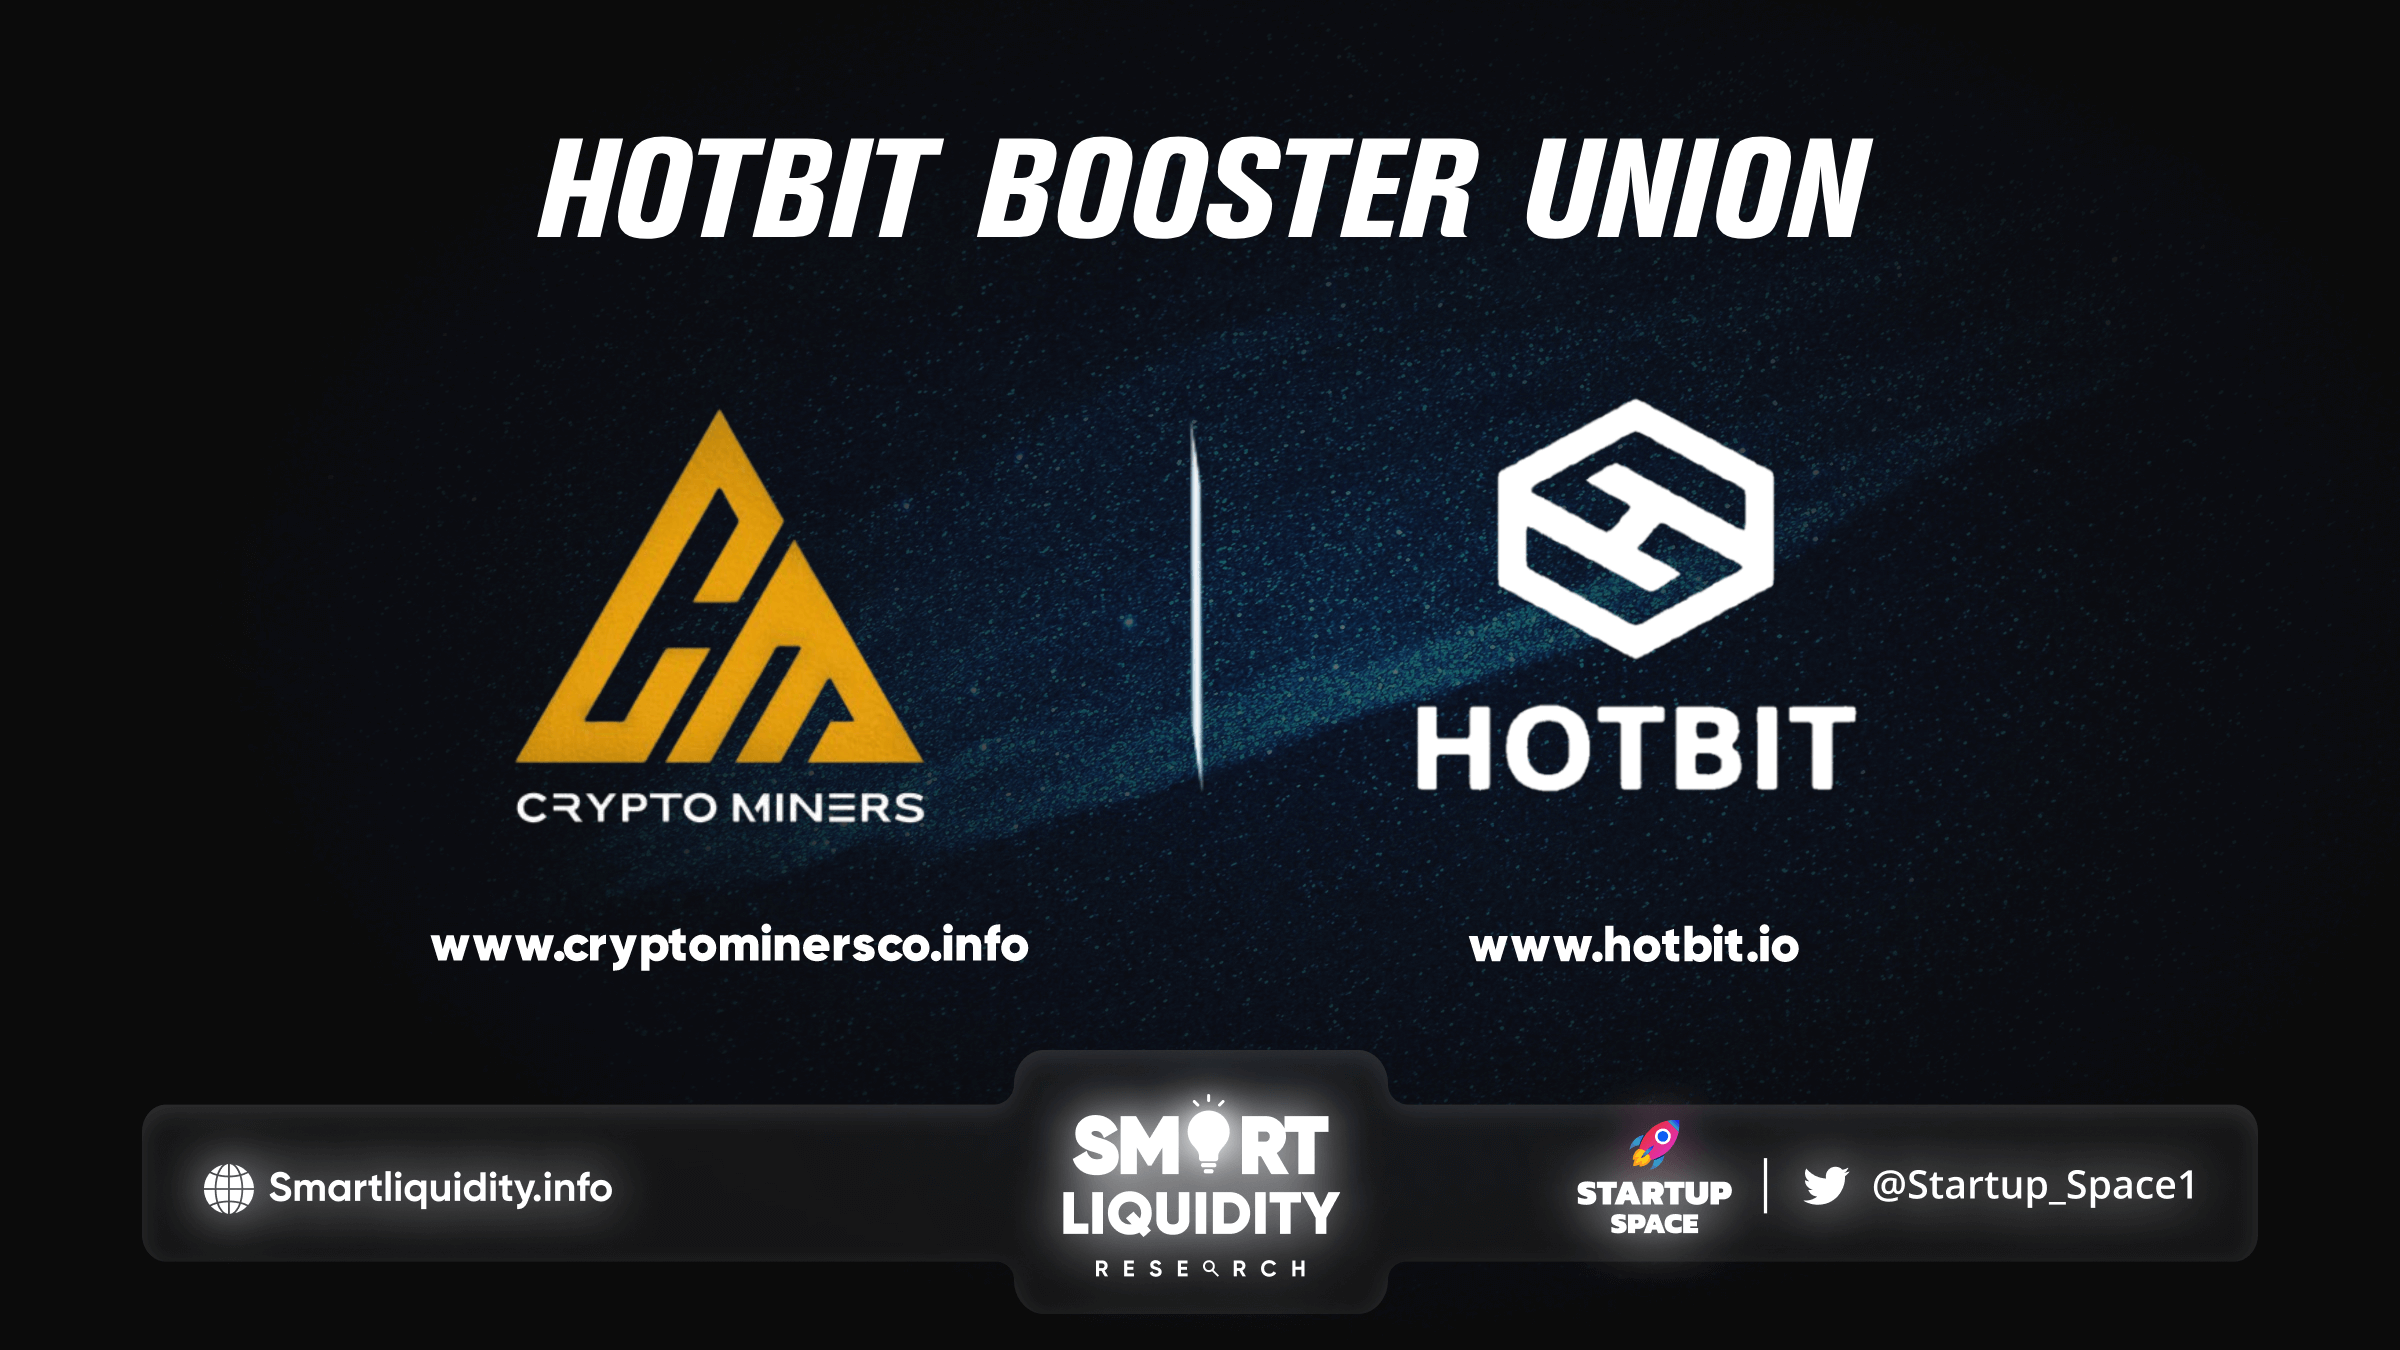 CryptoMiners Joins Hotbit Booster Union